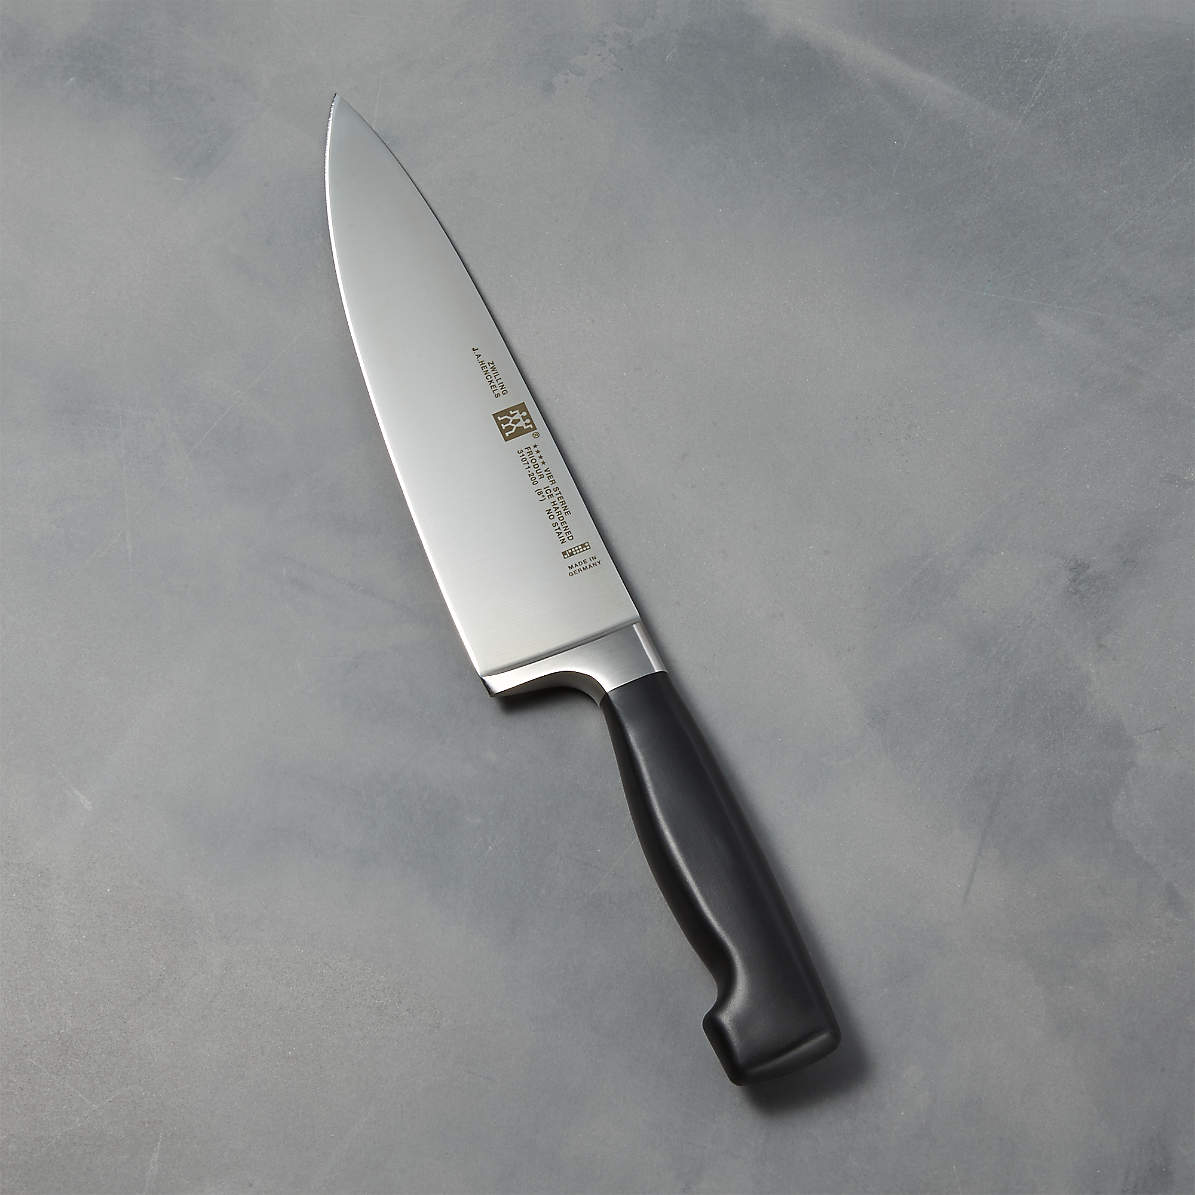  ZWILLING J.A. Henckels Five-Star 8-Inch Chefs Knife